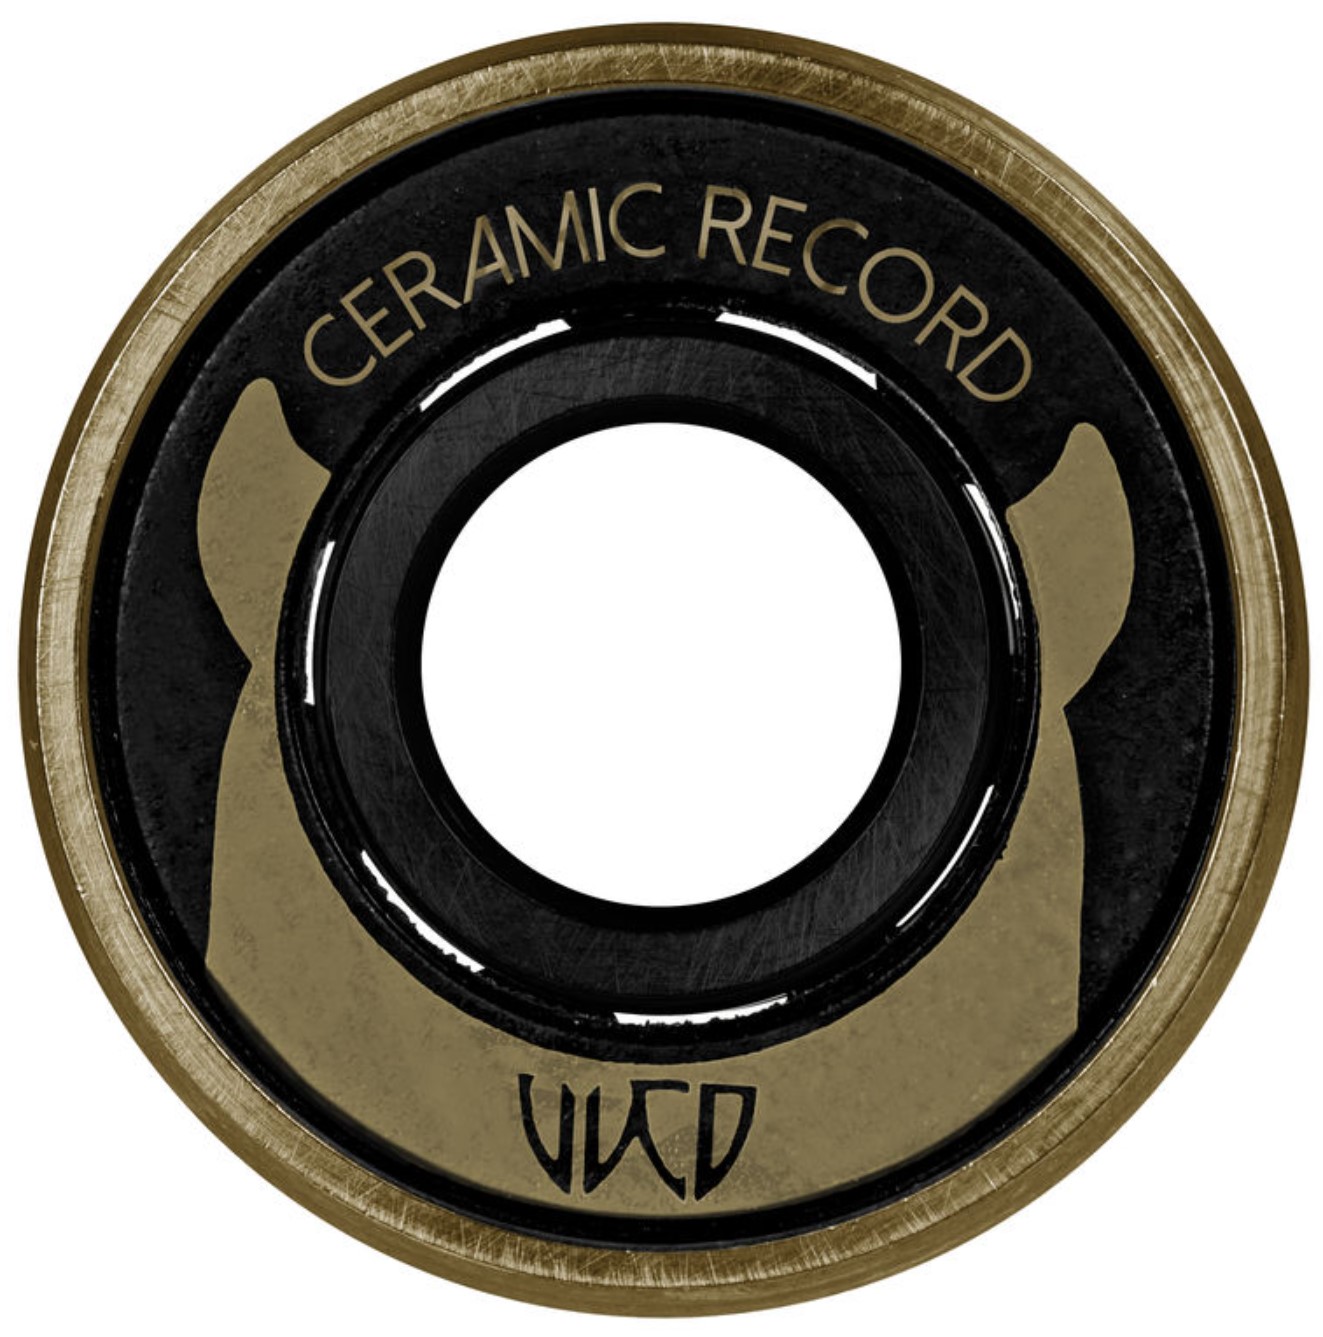 Wicked Ceramic Record bearings 16 pack